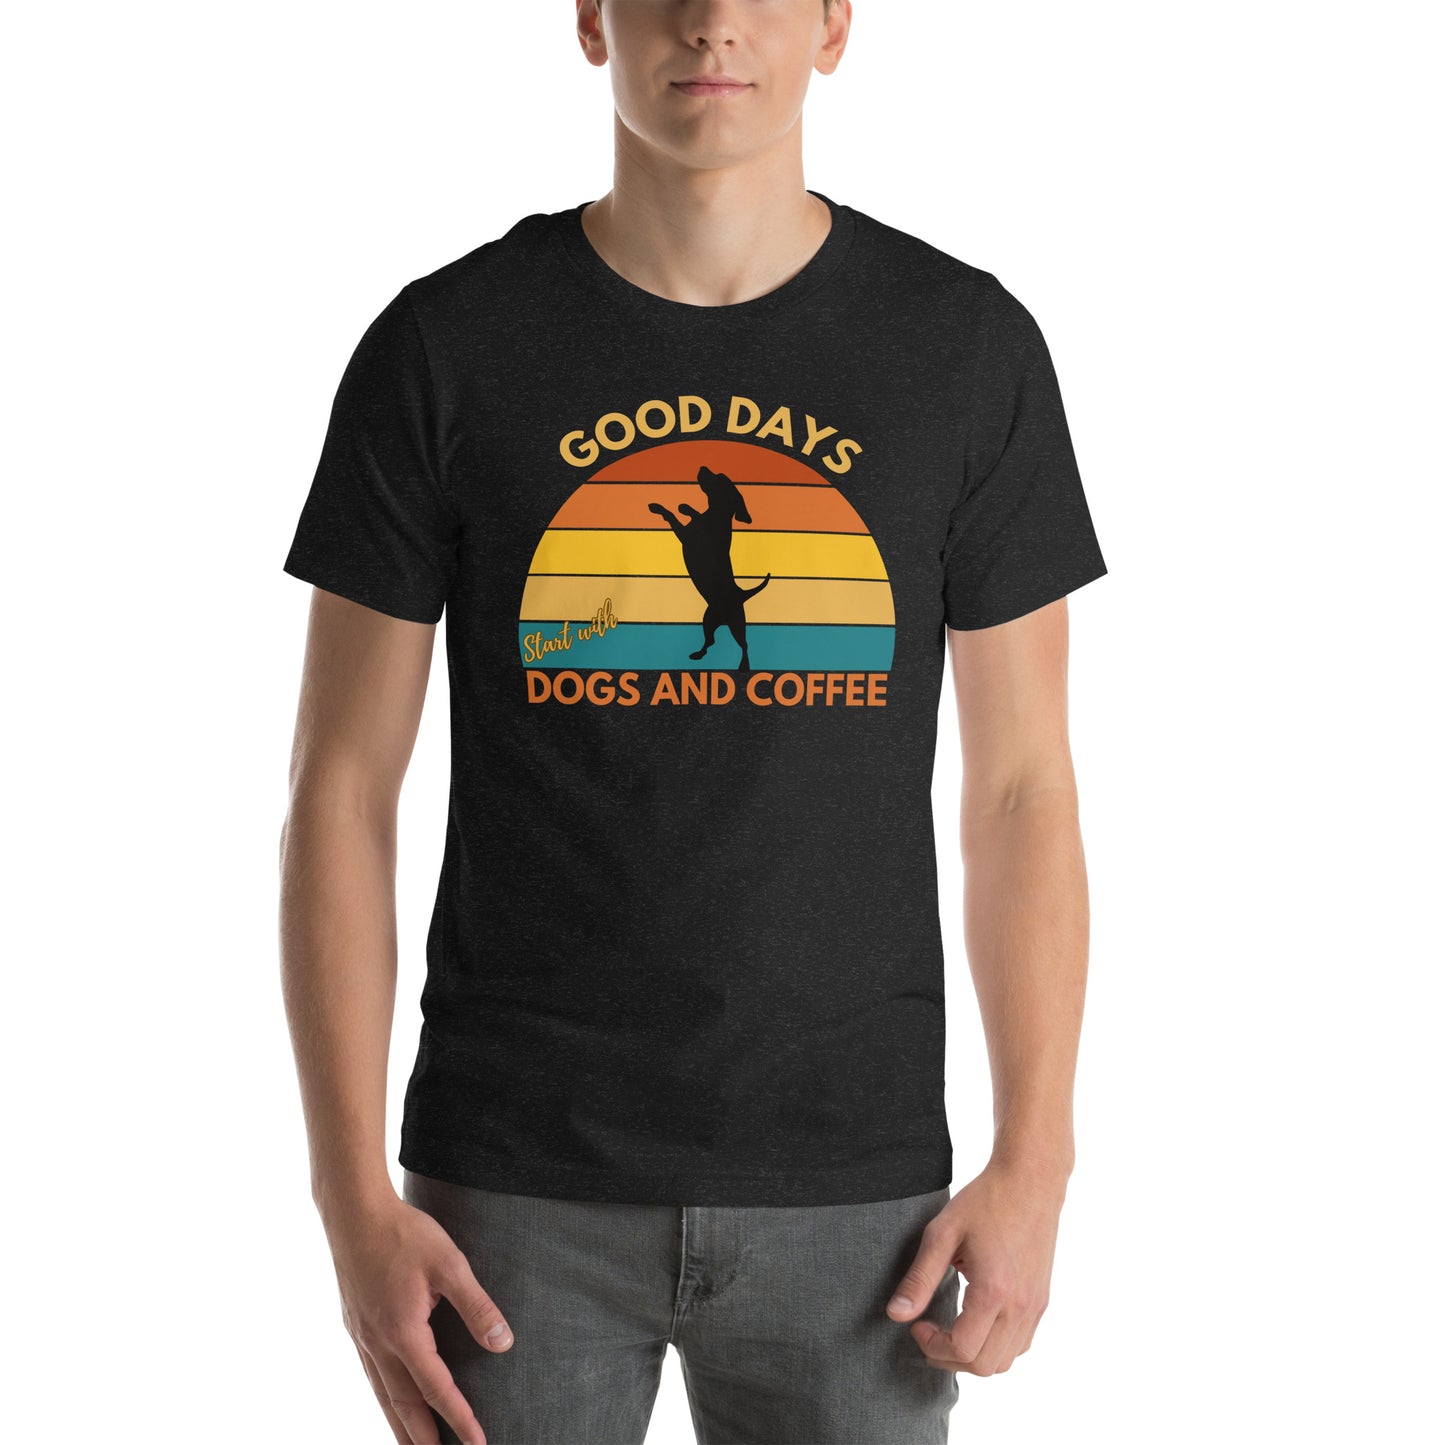 Good Days Start with Dogs and Coffee T-Shirt